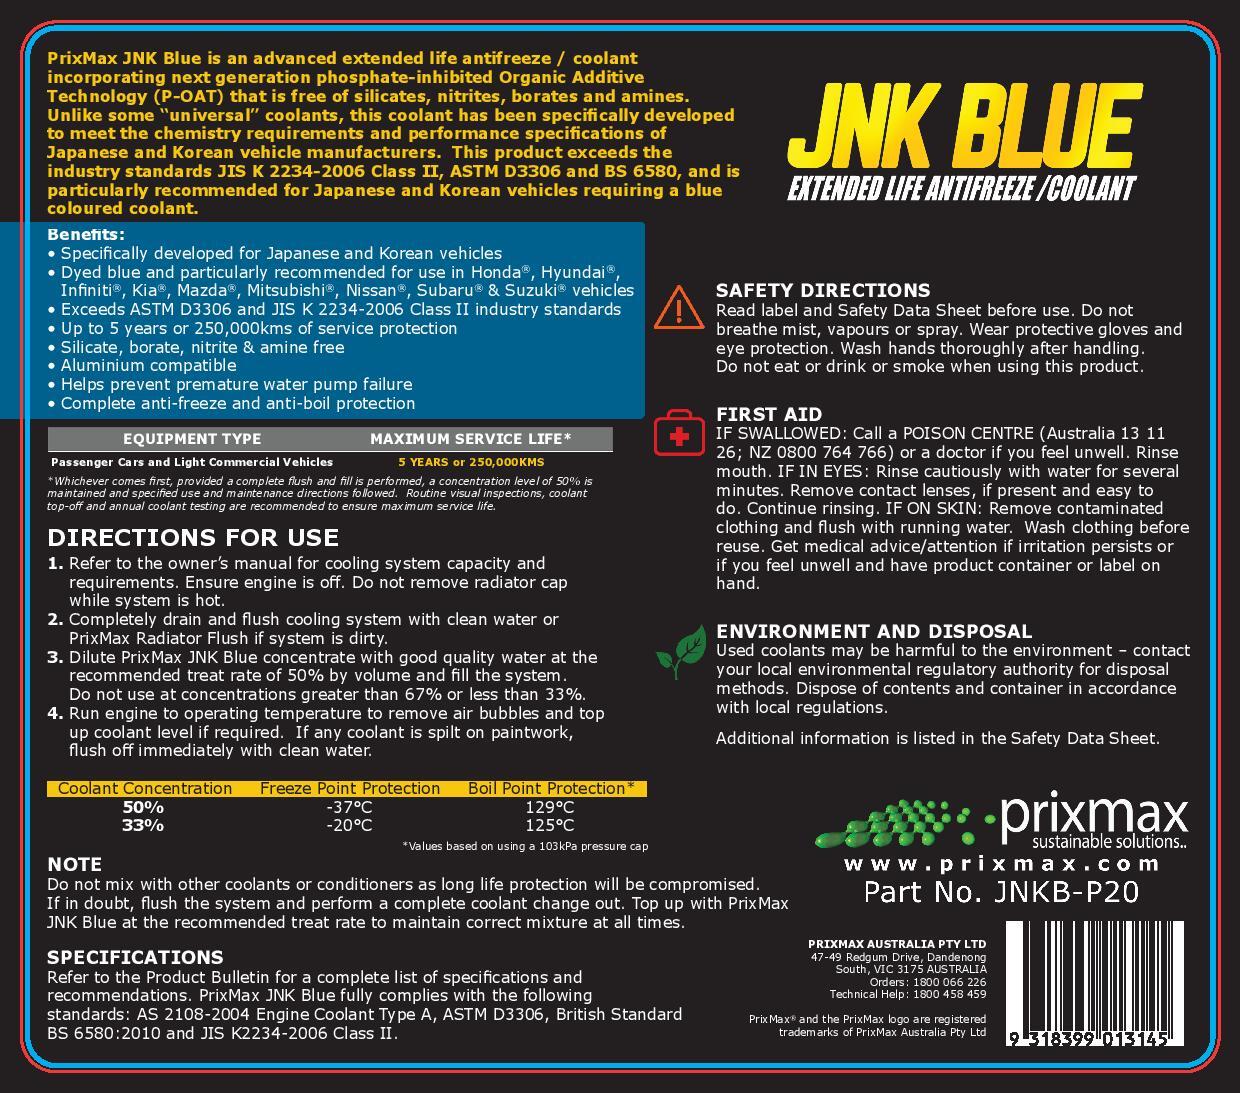 PrixMax JNK Blue Extended Life Antifreeze Antiboil Concentrate For Japanese & Korean Applications 5L